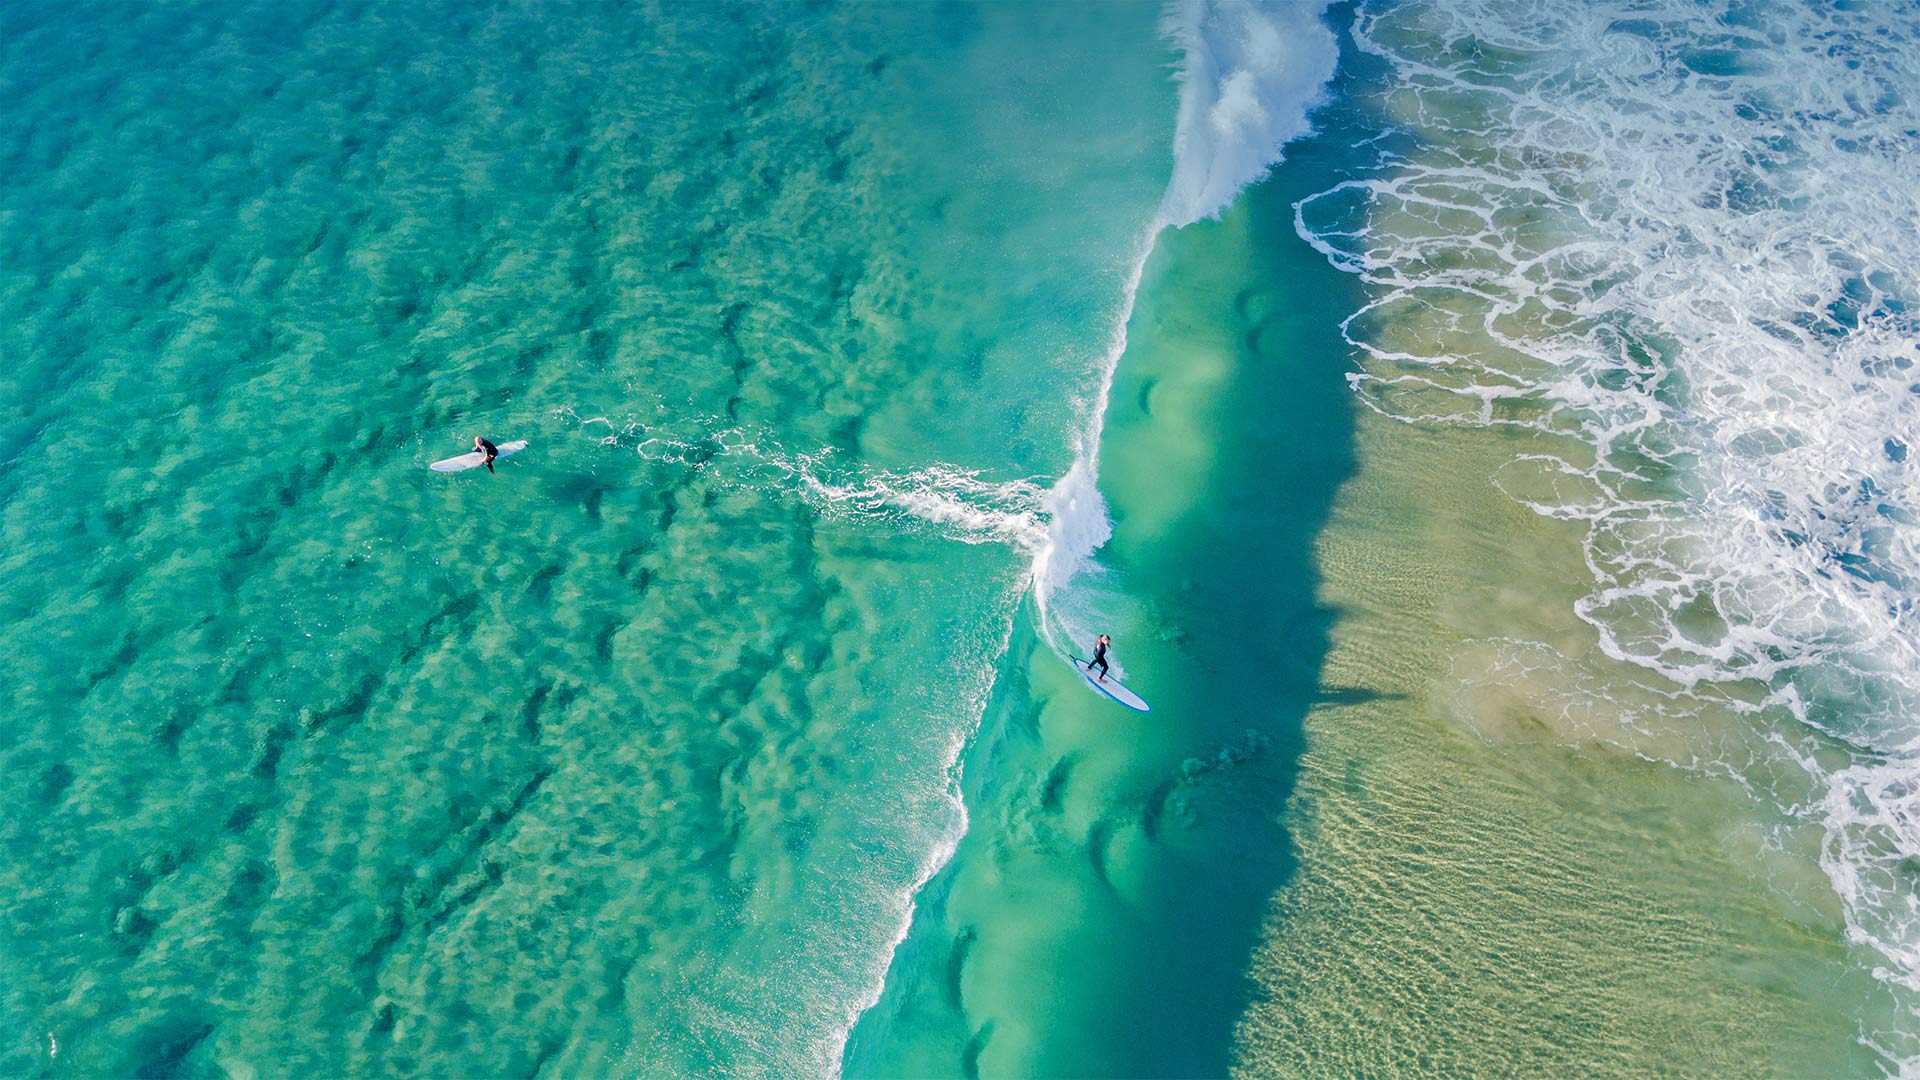 Surfers catching waves at Palm Beach on the Gold Coast, Queensland, Australia - Darren Tierney/Getty Images)